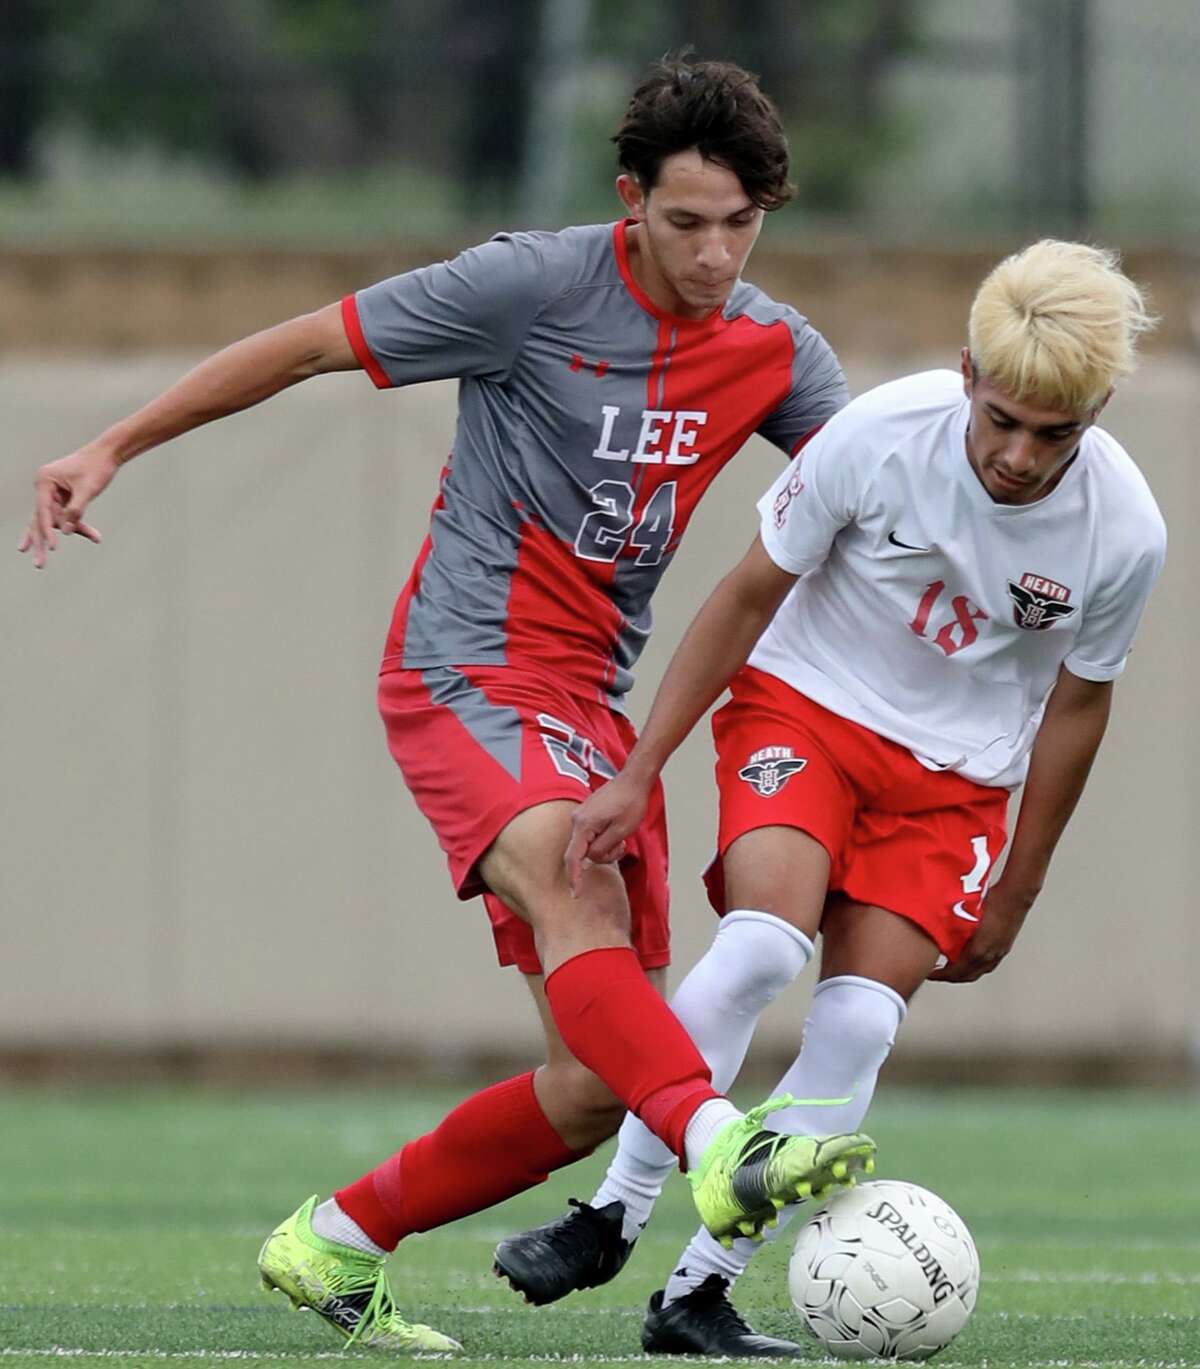 SA Lee’s Julian Sanchez (24) and Rockwall-Heath’s Luis Soto (18) struggle for control of the ball during their UIL 6A boys State championship soccer game at Birkelbach Field on April 17, 2021 in Georgetown, Texas.